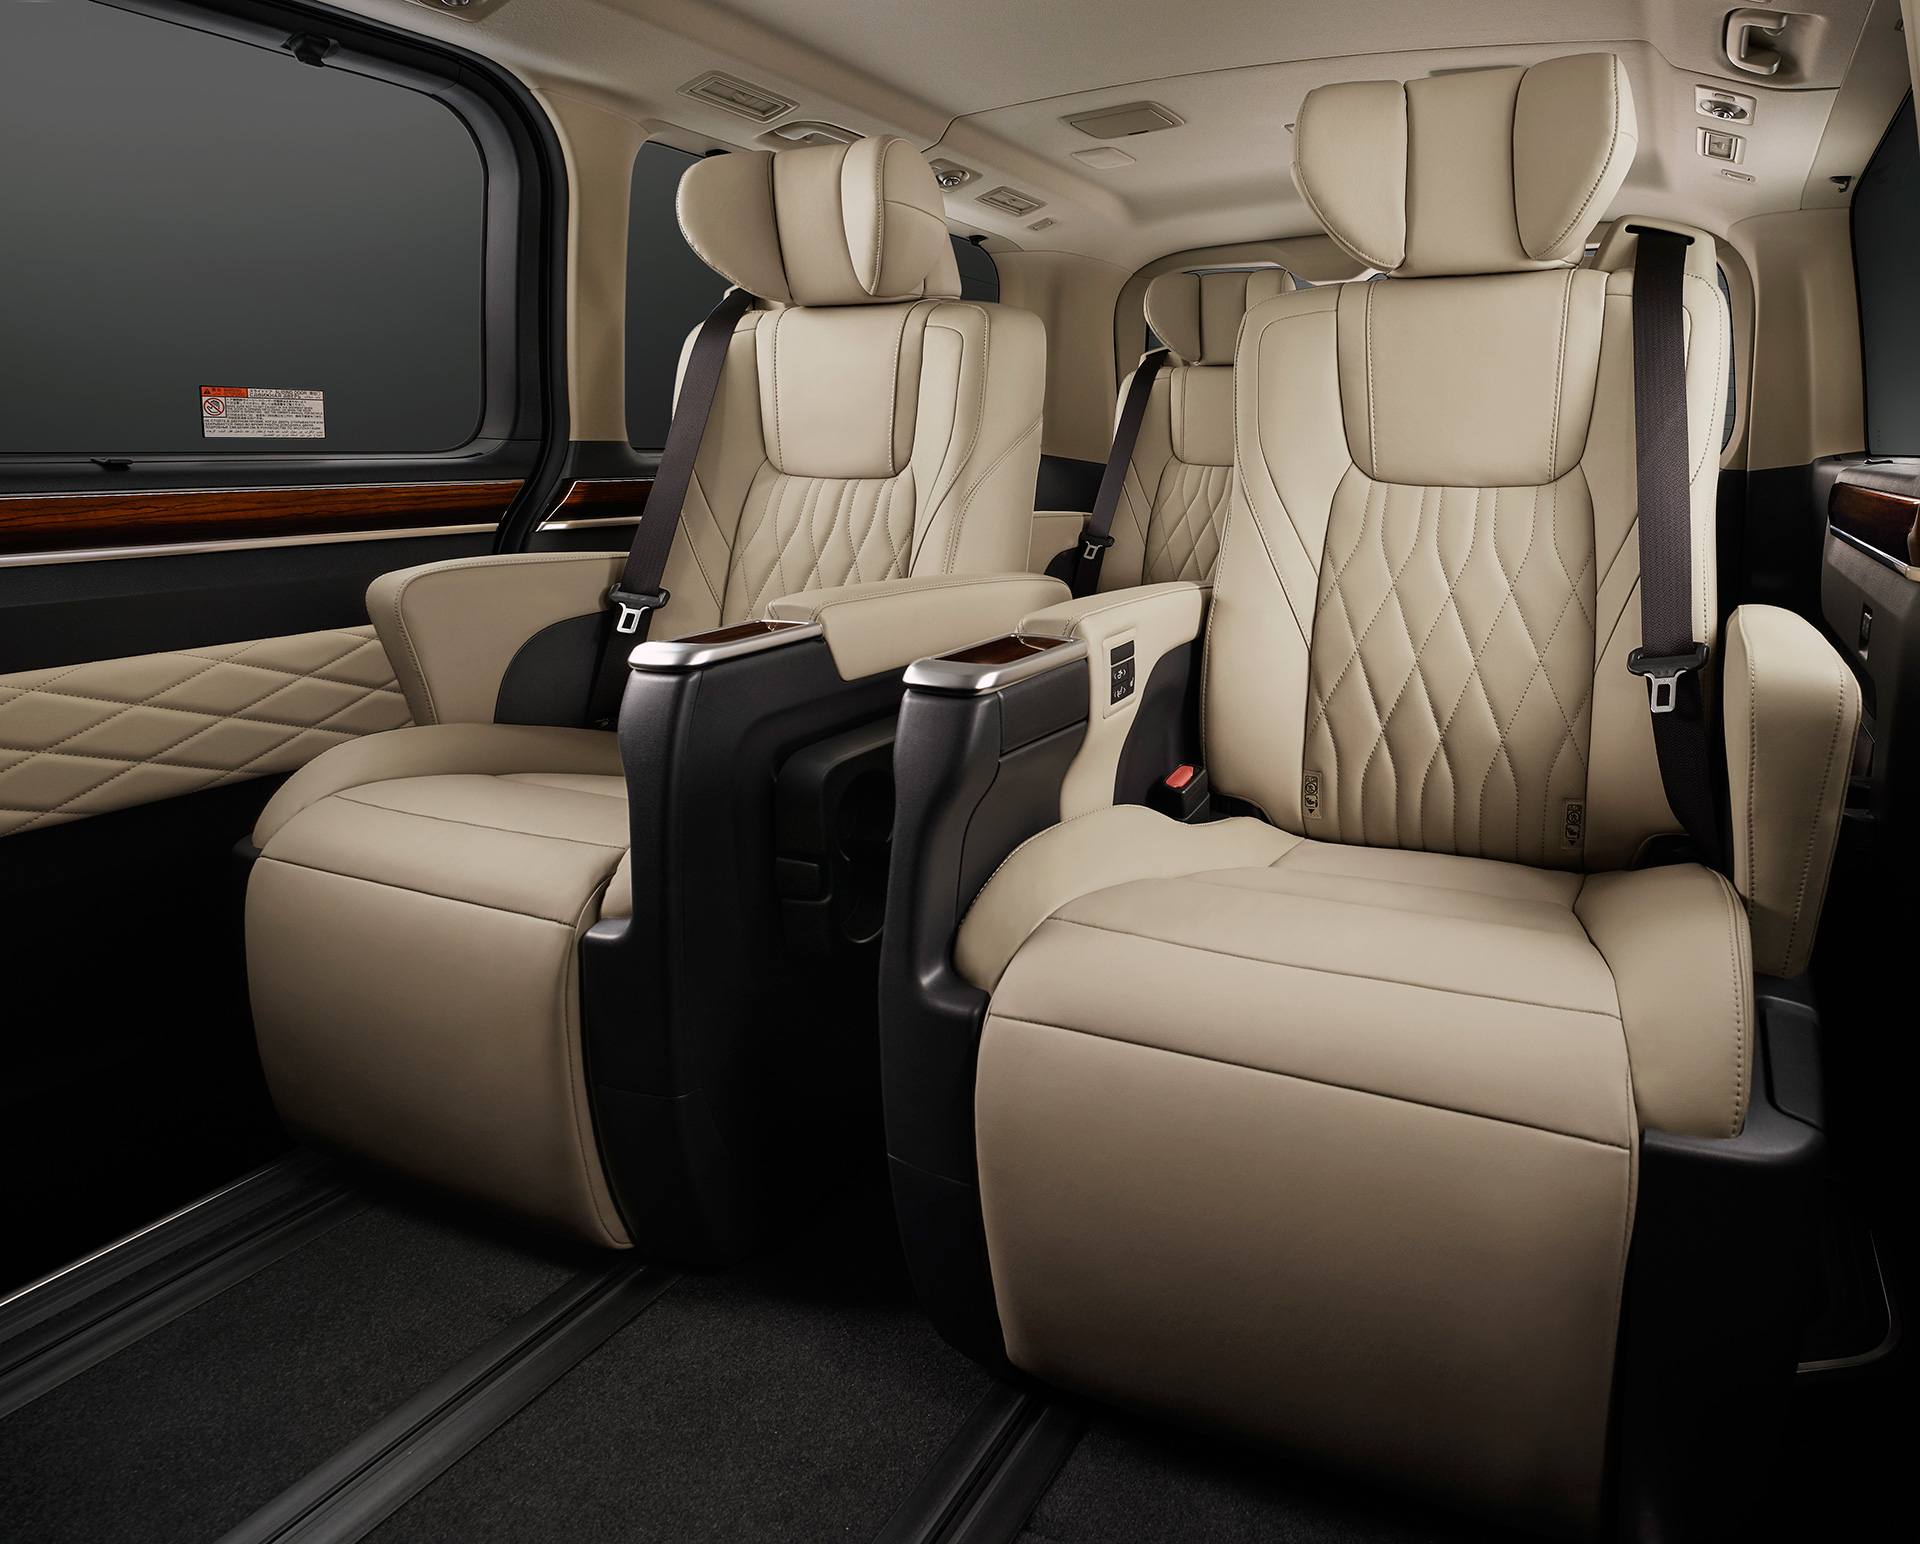 Toyota to Launch New Model "Granace" in JapanSales of large luxury wagon to start from December 16 - Image 5